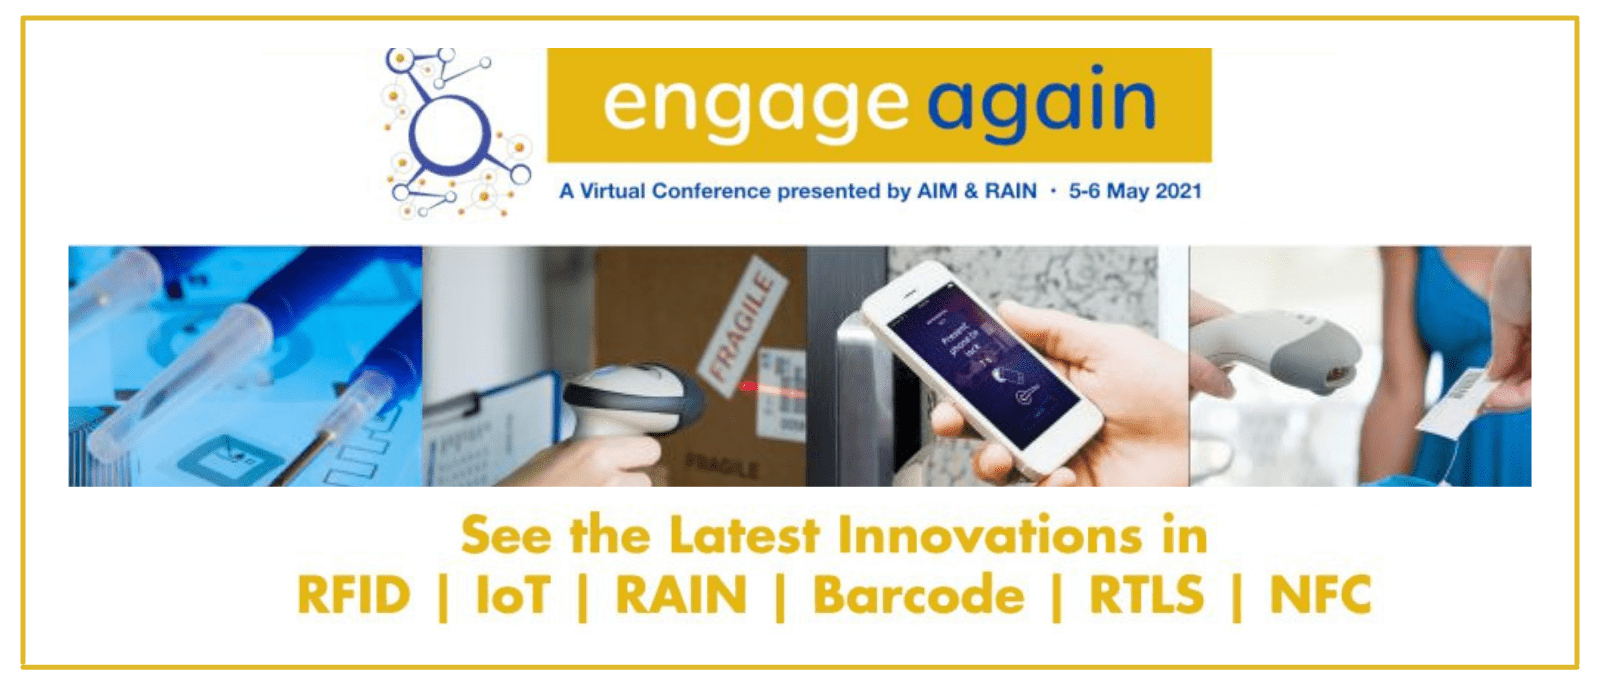 See the latest innovations in RFID, IoT, Rain, Barcode, RTLS and NFC.